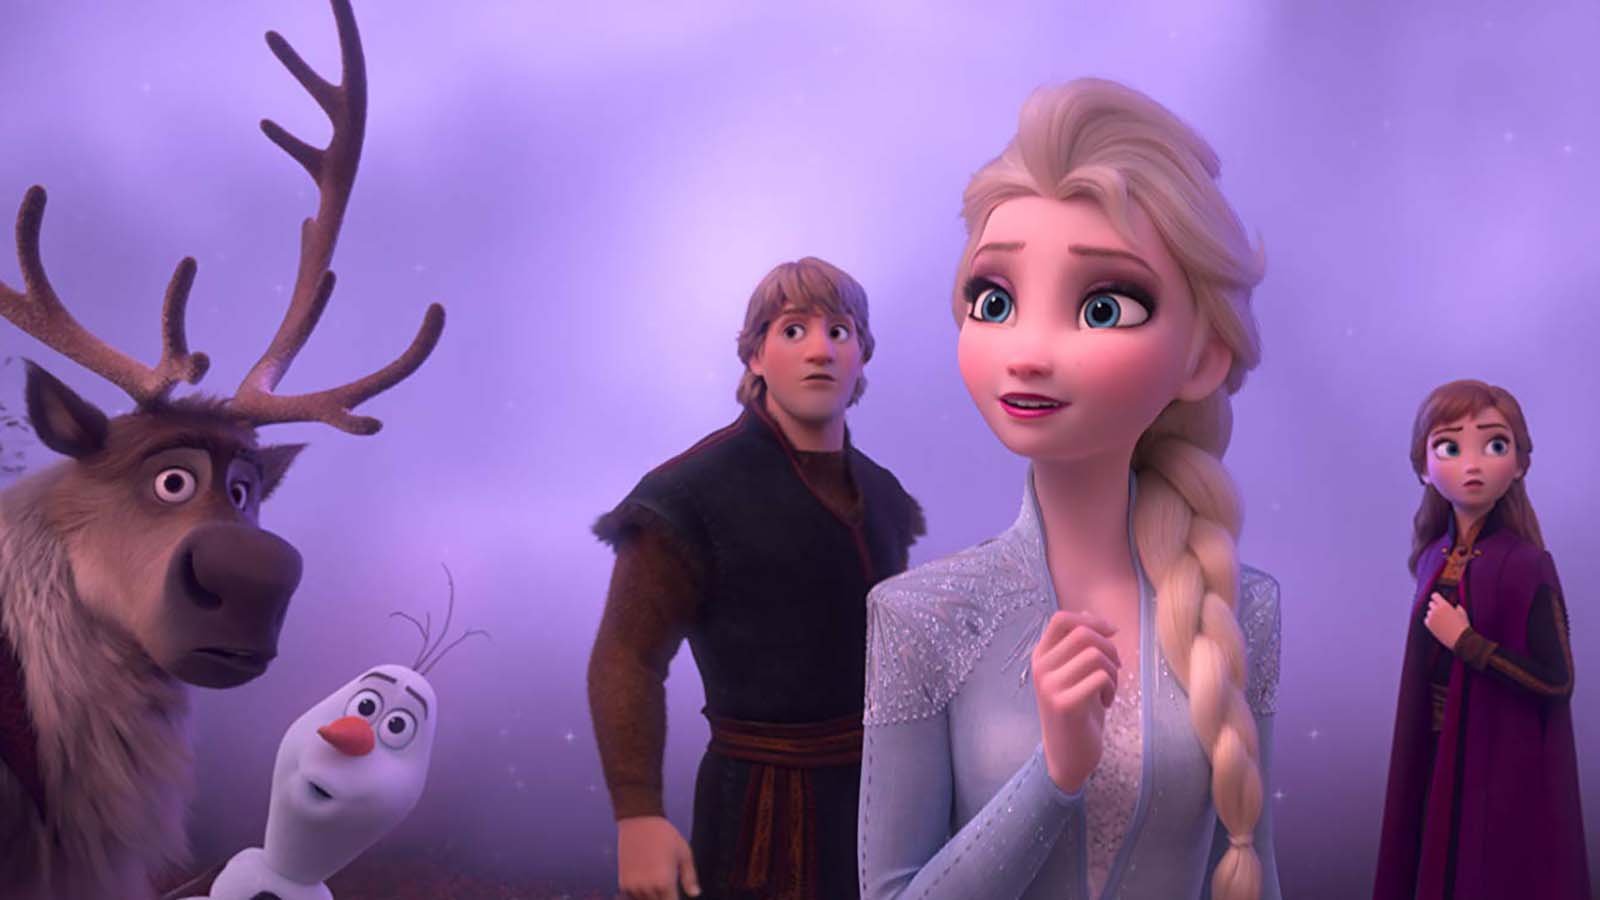 "Frozen 2," the studio's animated sequel to the 2013 phenomenon, brought in an estimated $127 million in North America this weekend. (Credit: Disney via CNN Wire)